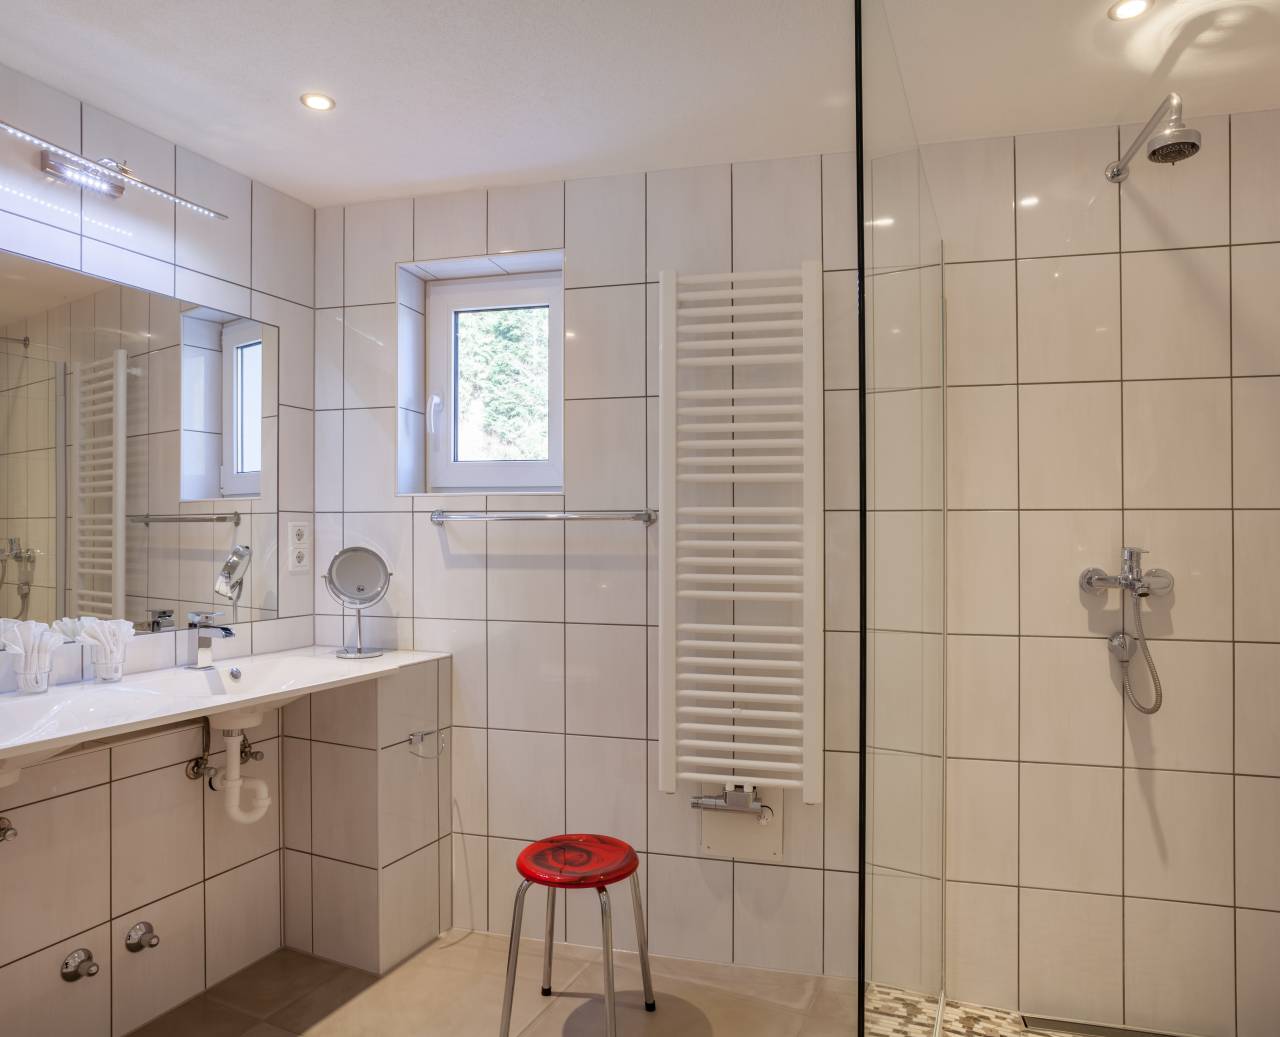 White tiled bathroom with shower, sink, wall mirror and towel dryer